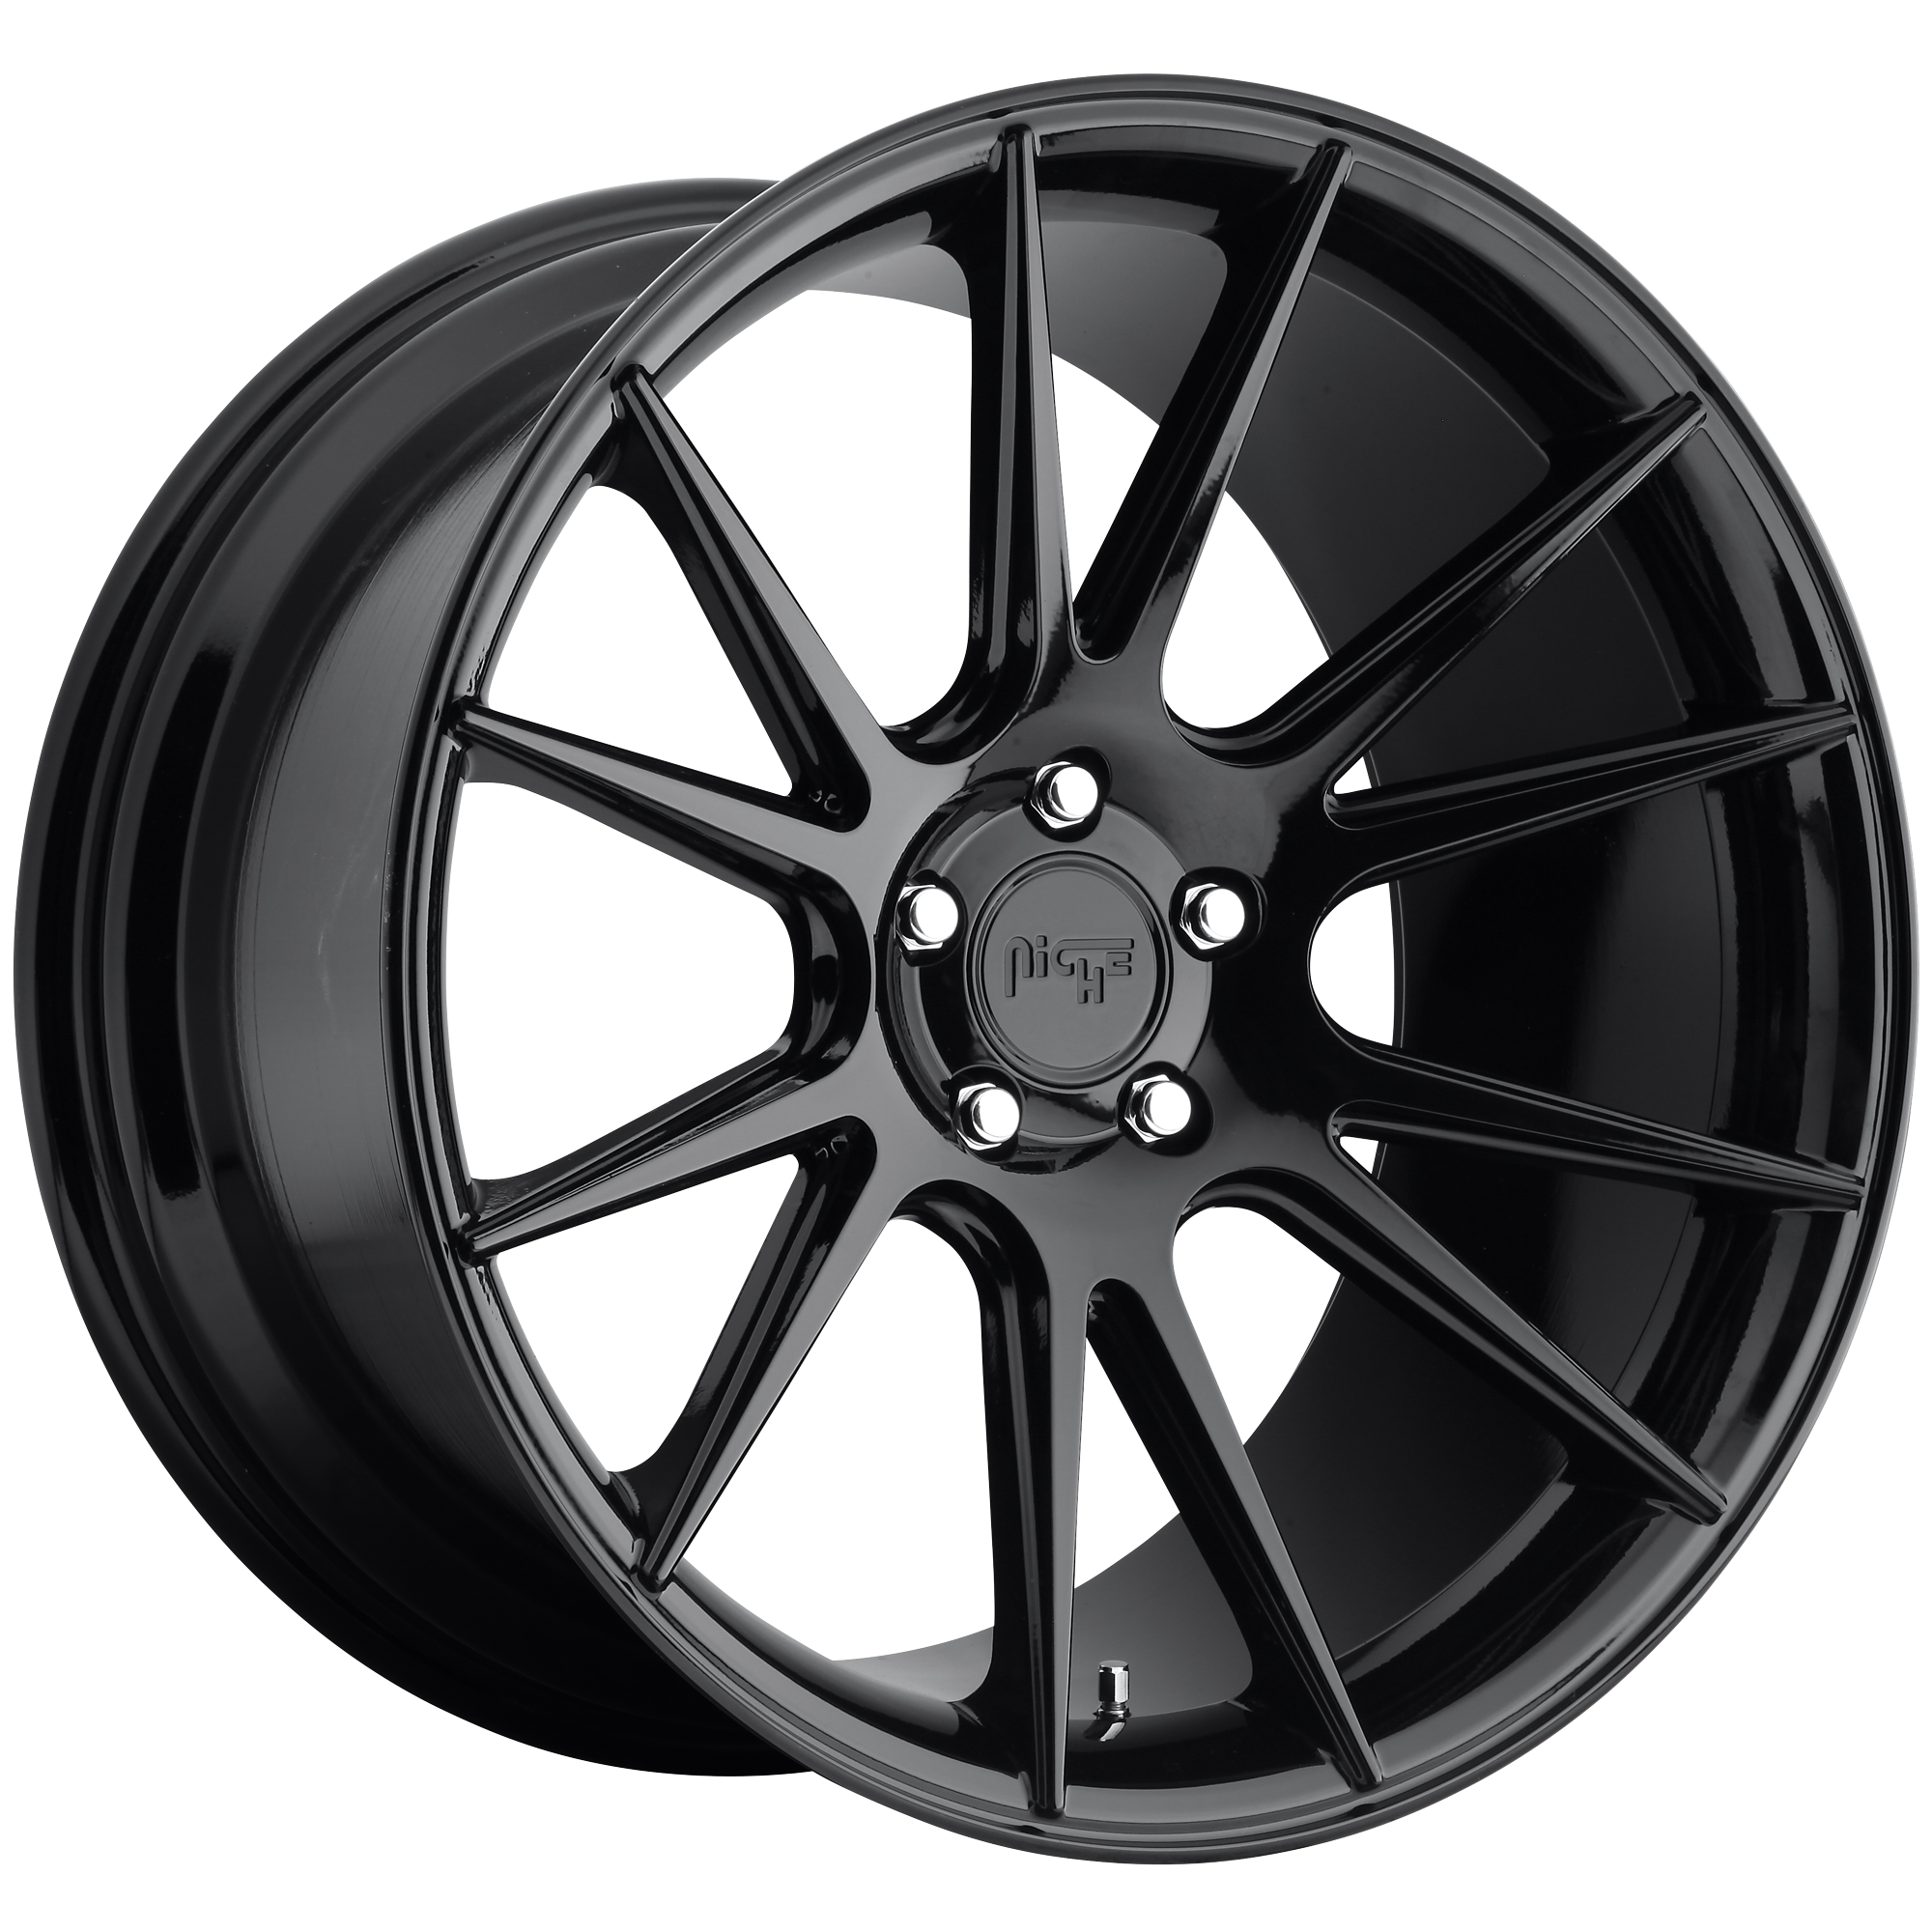 VICENZA 20x10 5x120.00 GLOSS BLACK (40 mm) - Tires and Engine Performance